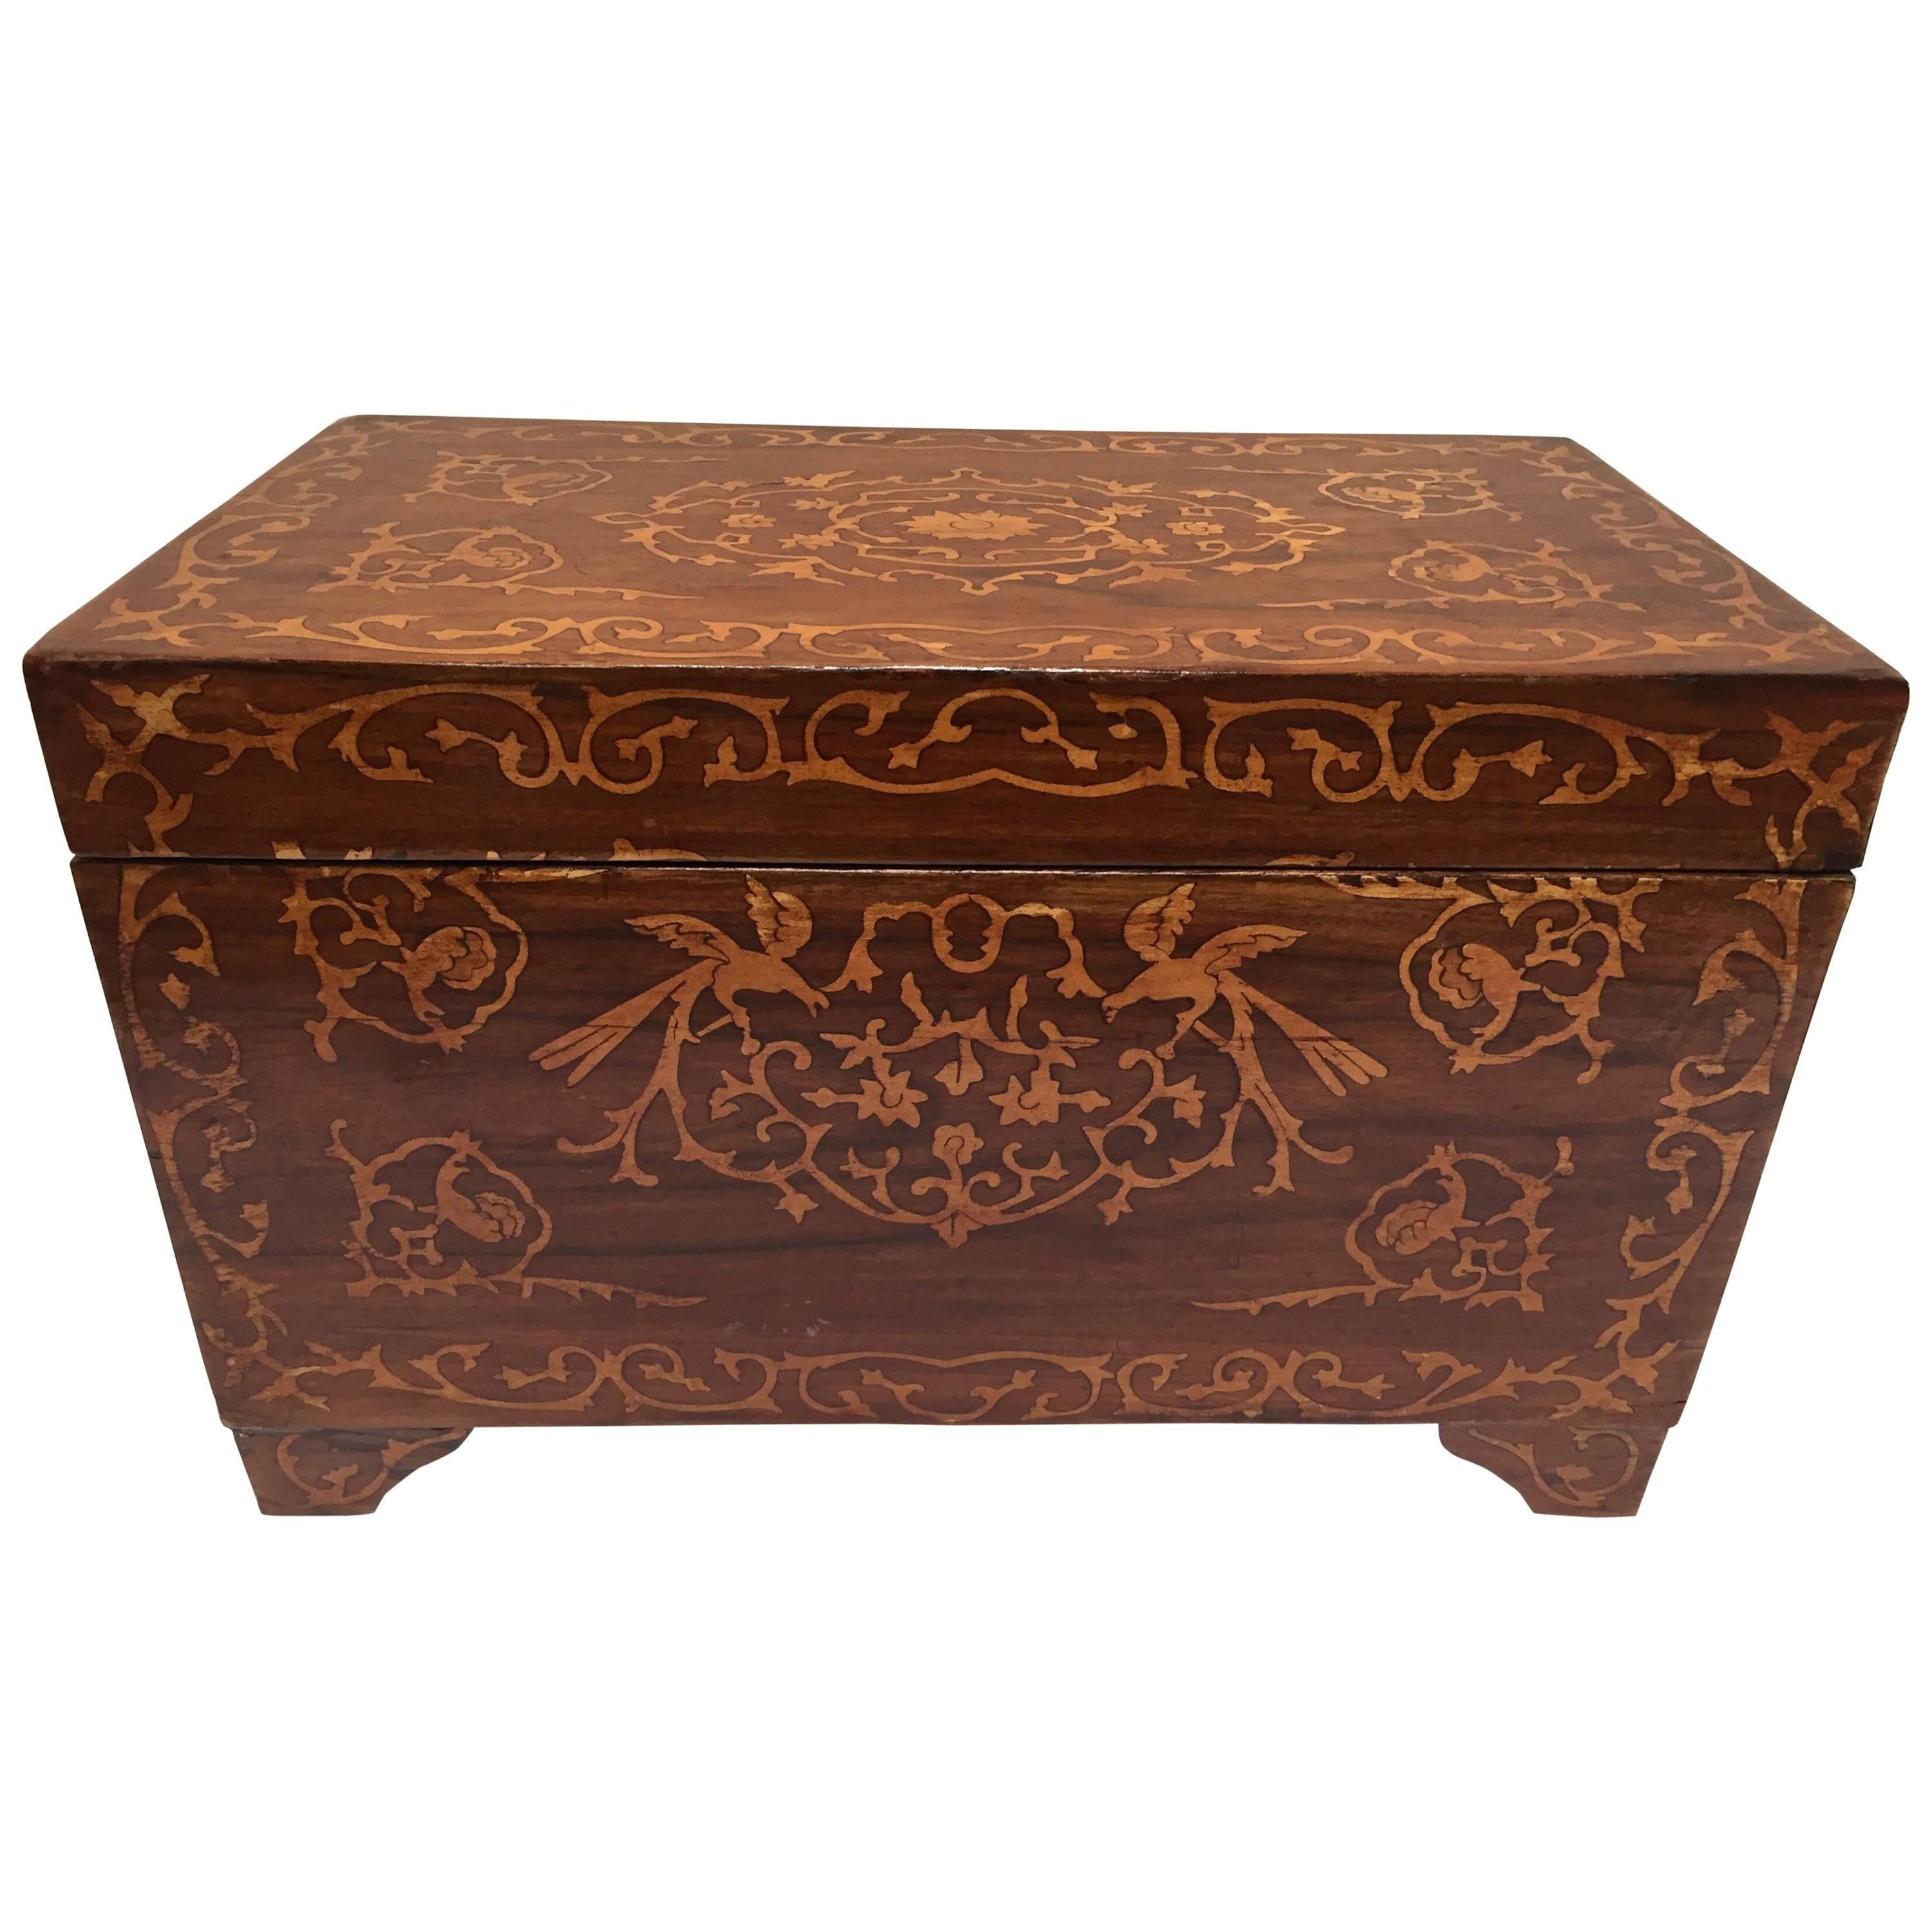 Large Italian Wedding Chest Inlaid with Precious Fruitwood